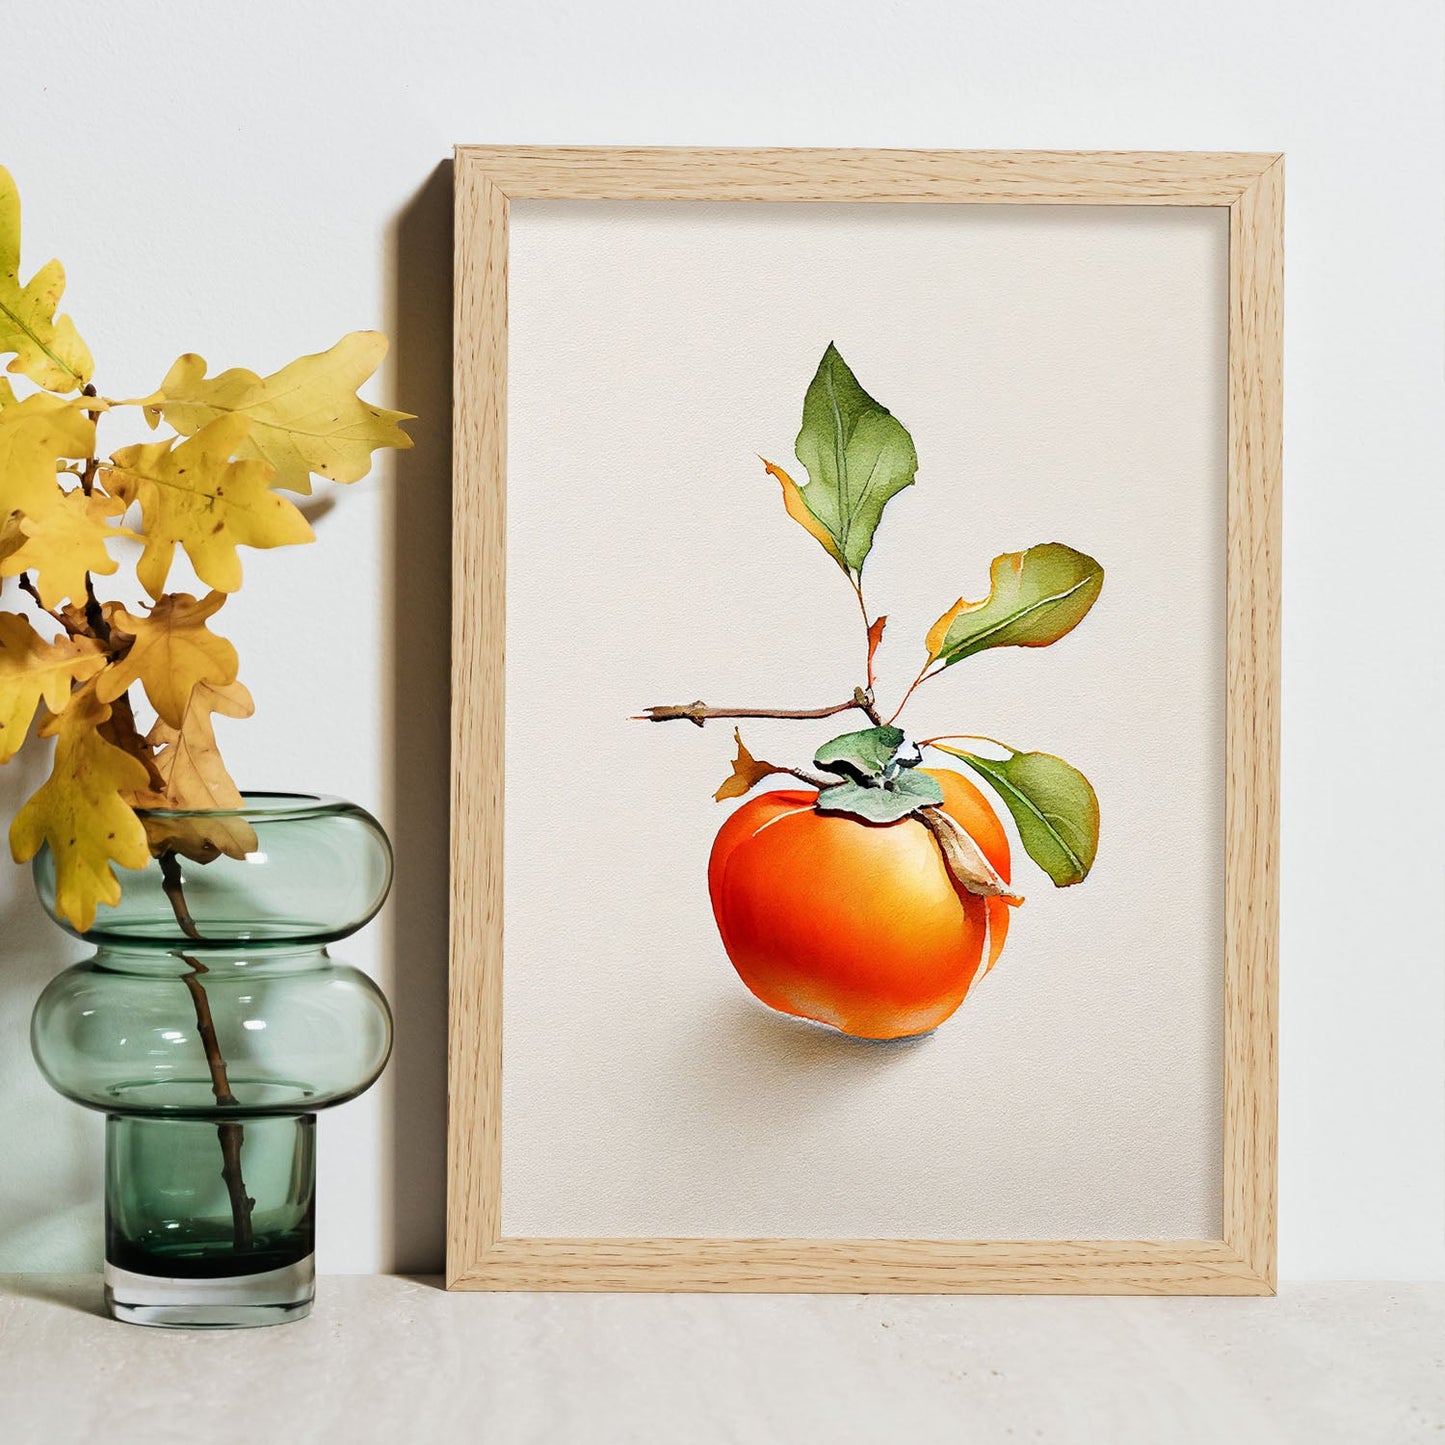 Nacnic minimalist Persimmon. Aesthetic Wall Art Prints for Bedroom or Living Room Design.